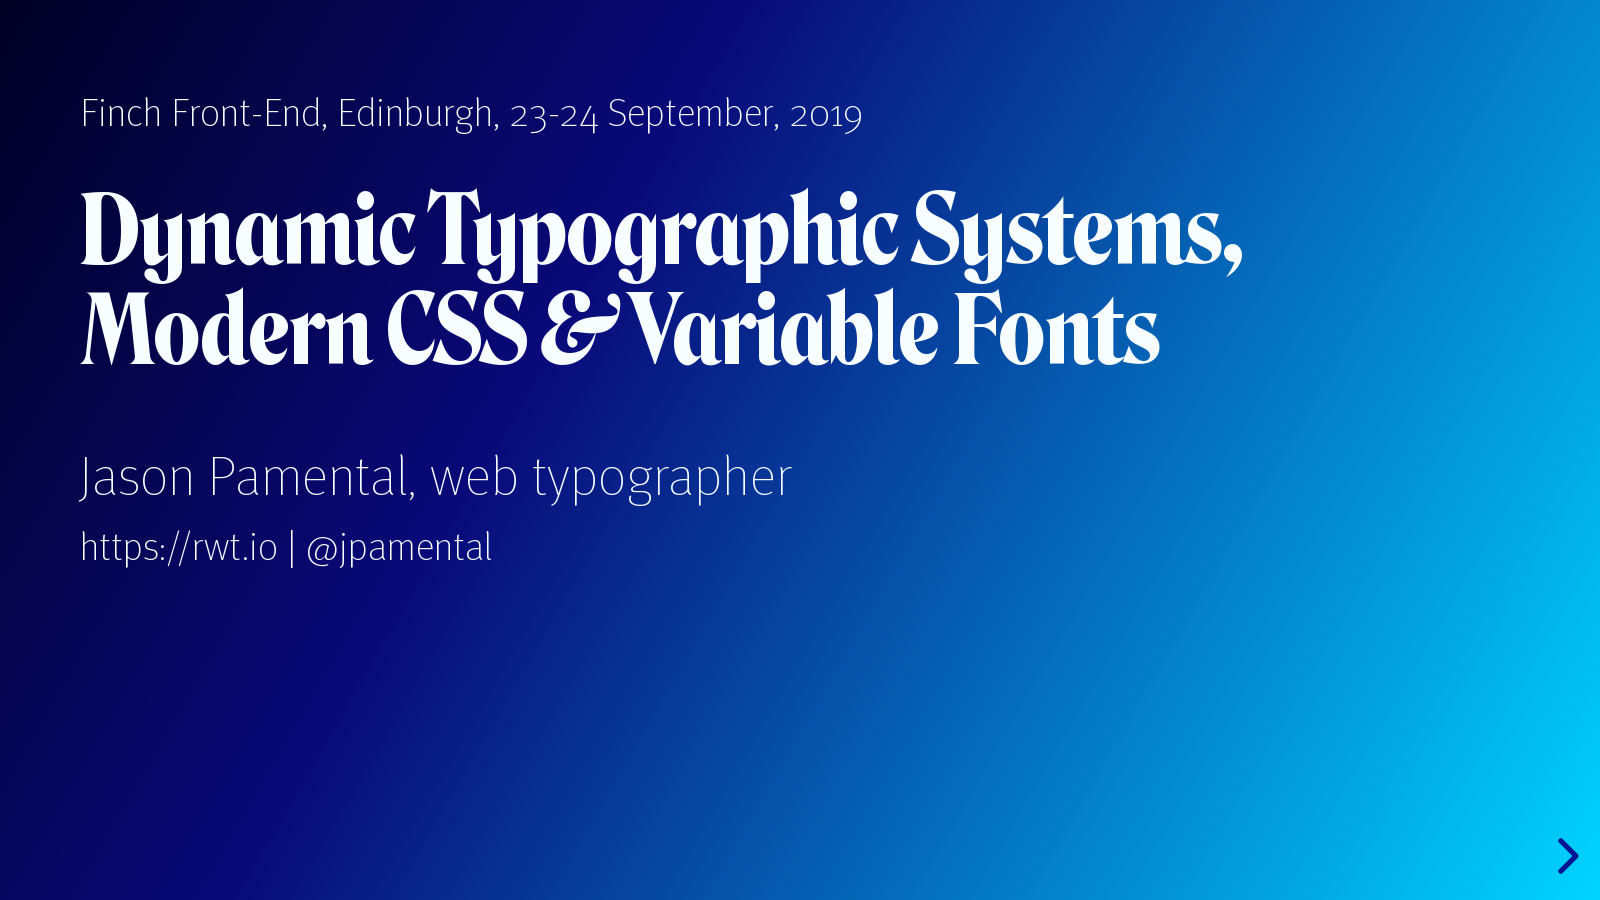 Dynamic Typographic Systems, Modern CSS & Variable Fonts